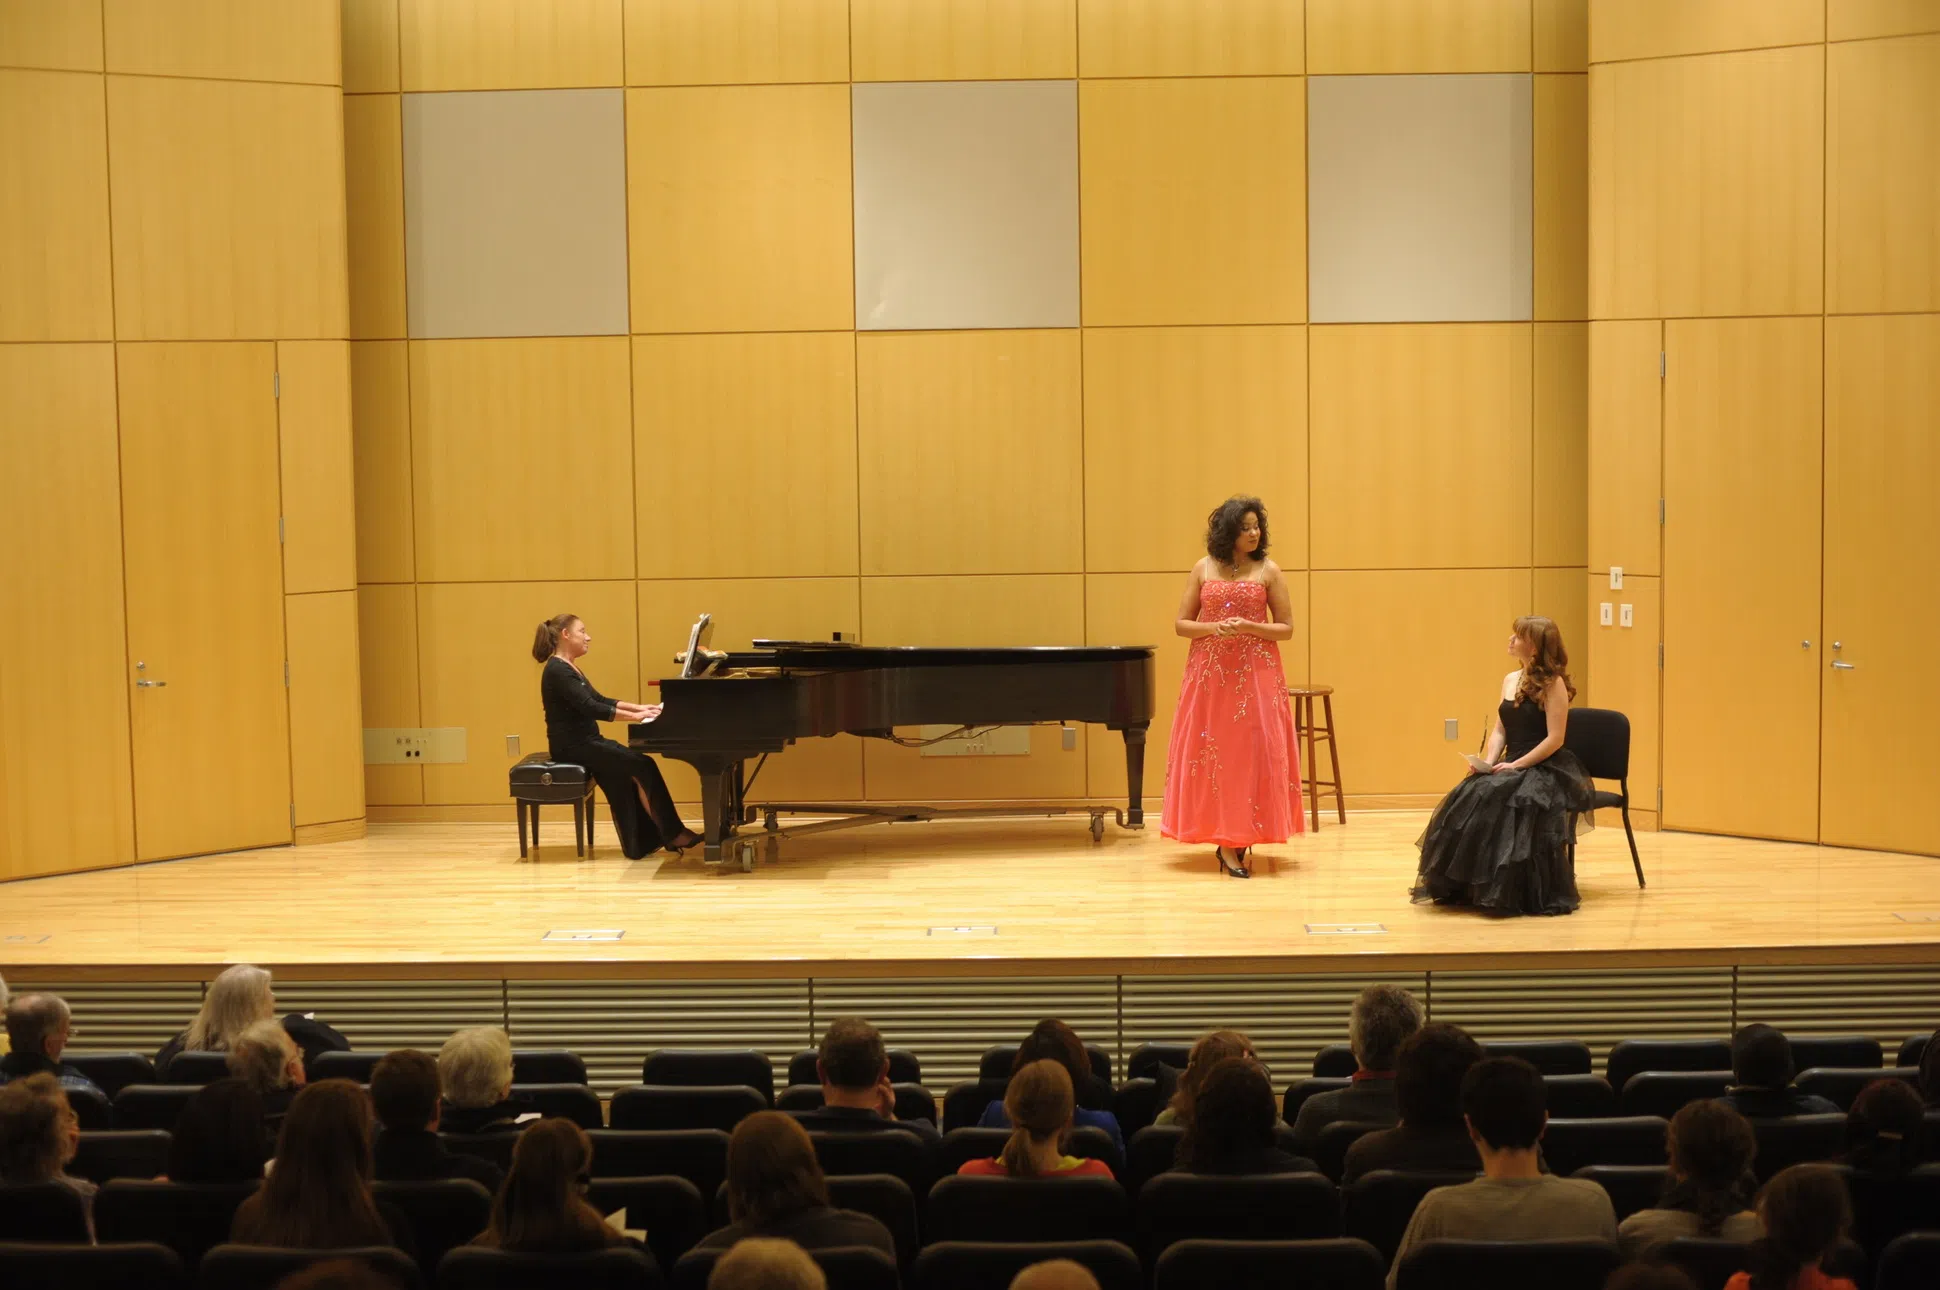 concert hall with stage, piano, and three performers